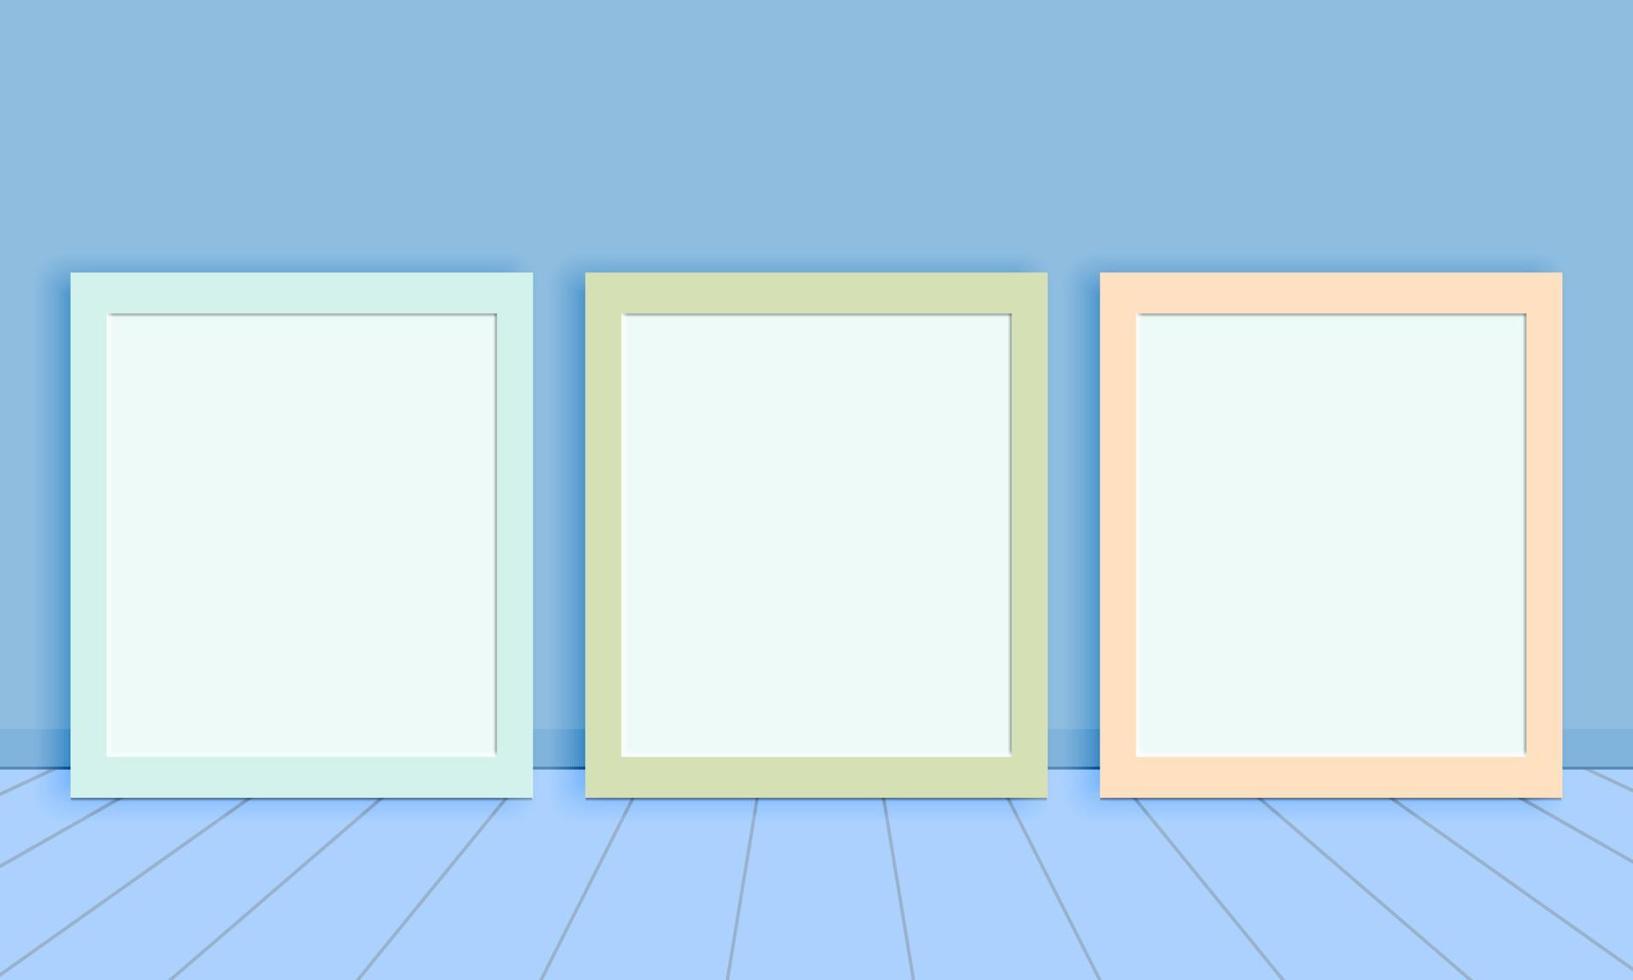 Vertical photo frame mockup on the floor leaning against the room wall vector